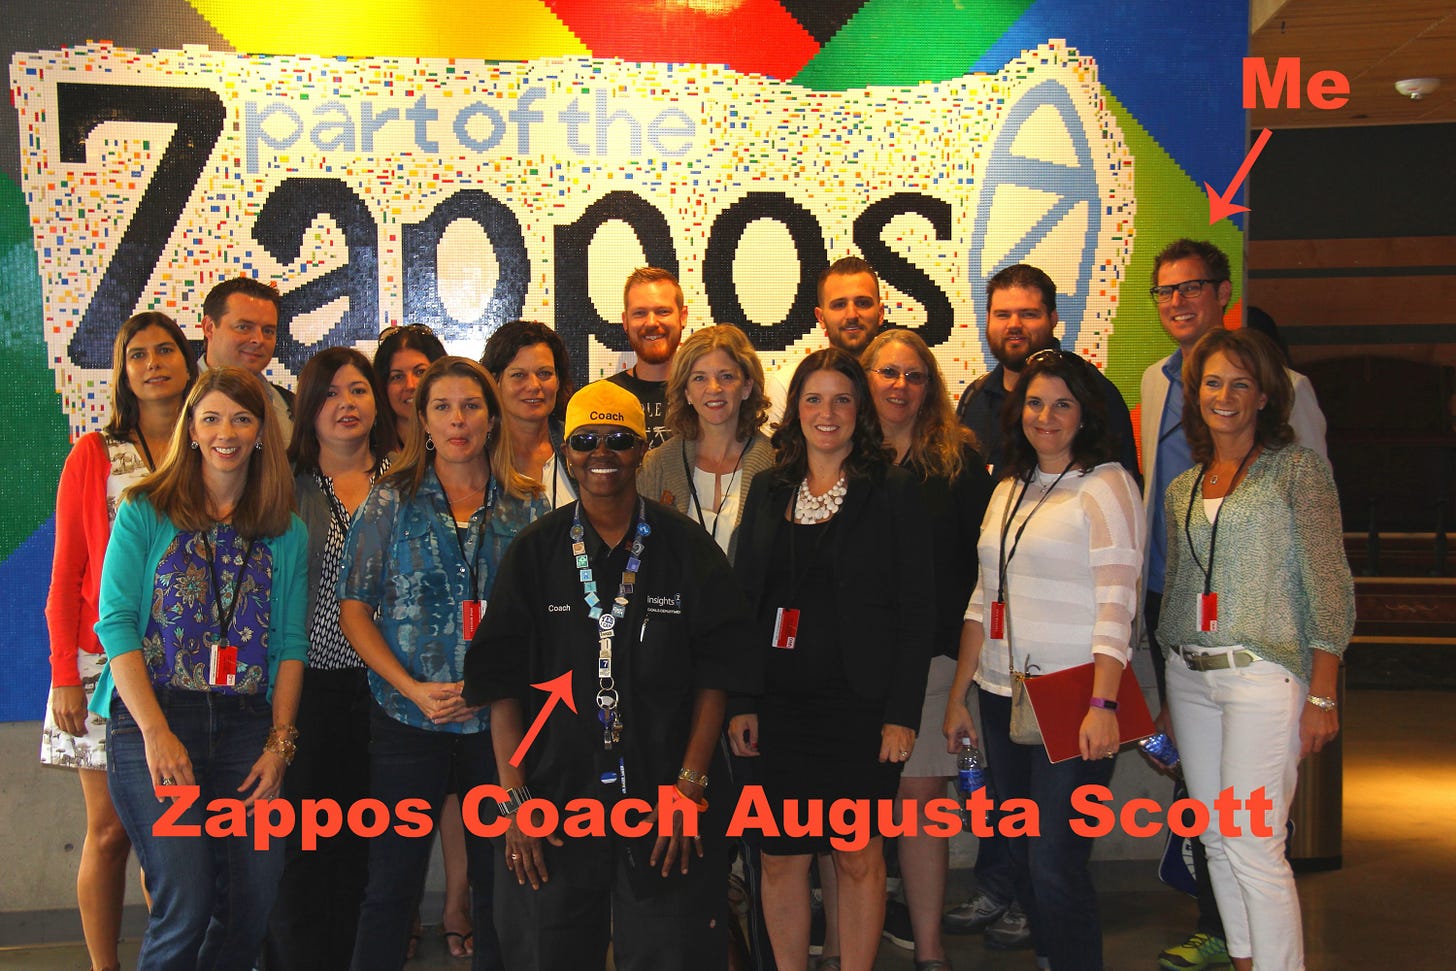 A group of smiling attendees in front of a giant zappos sign made out of legos.